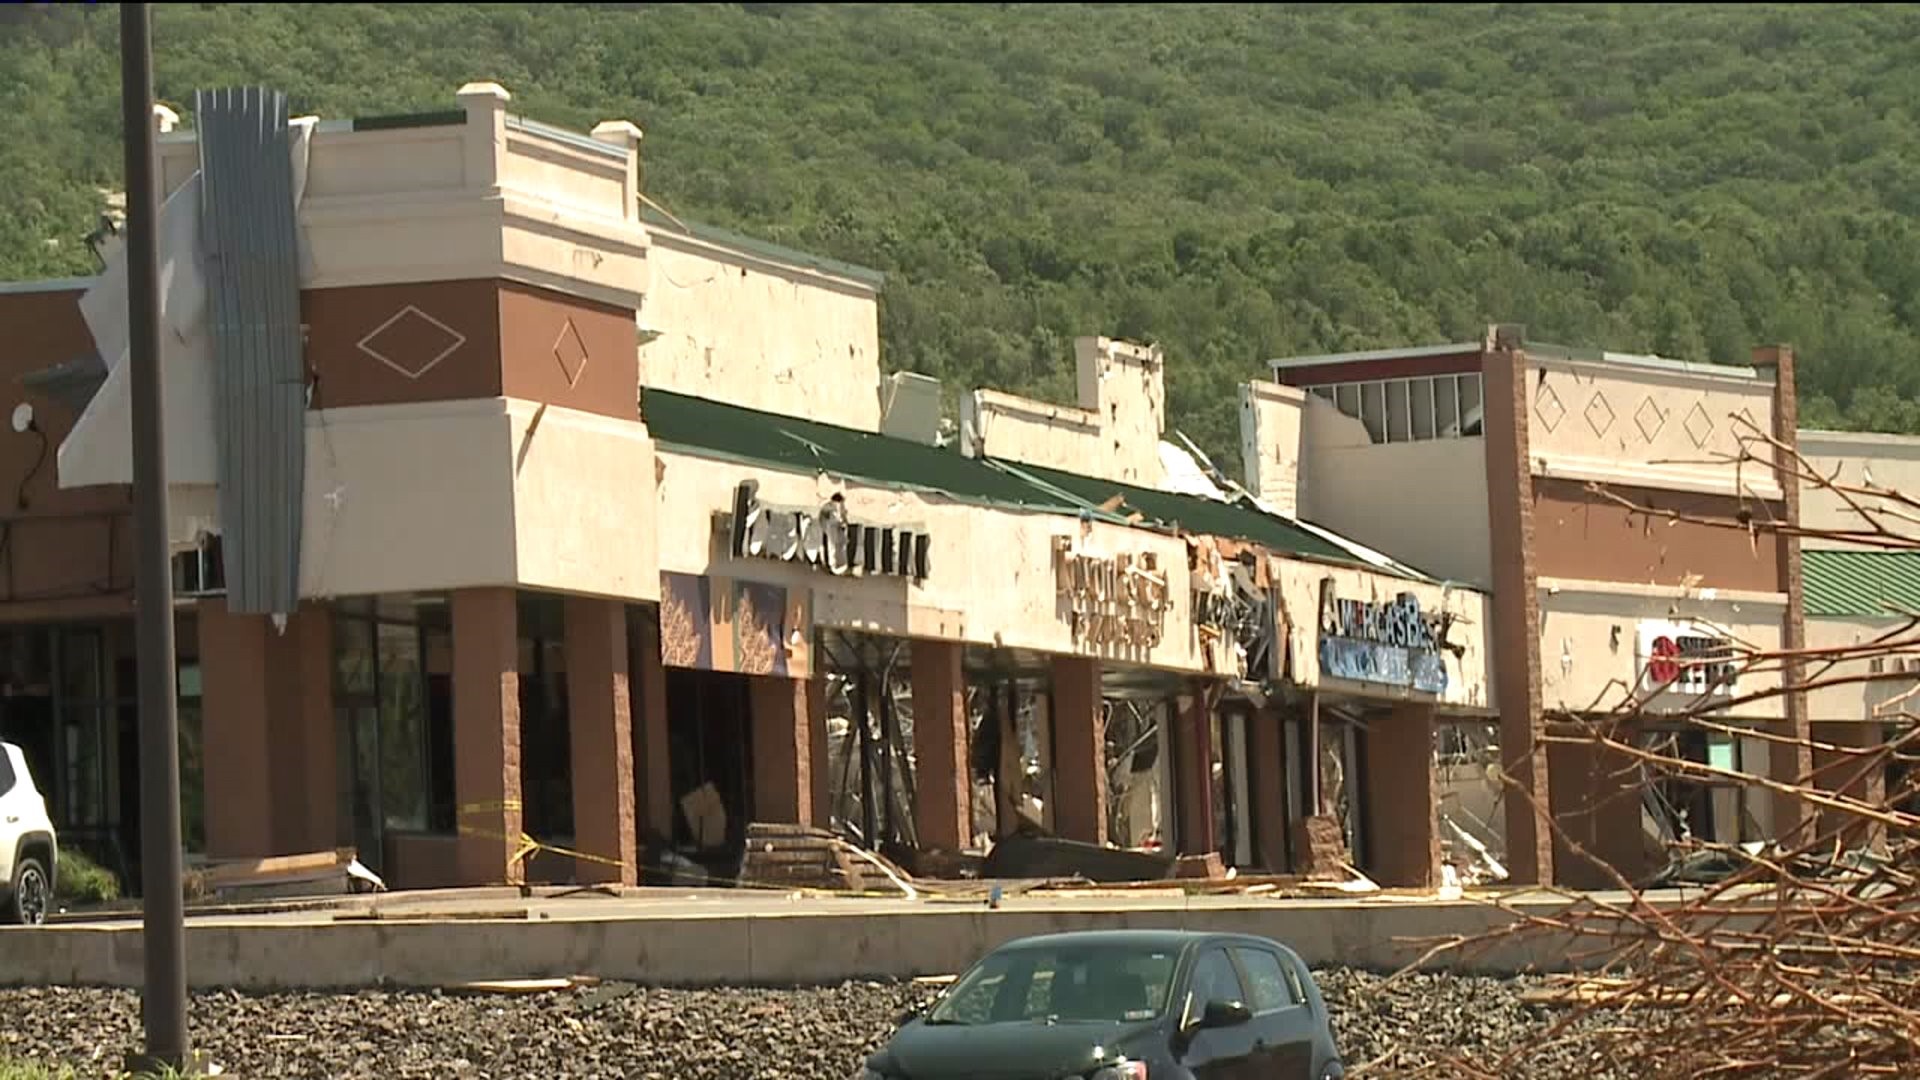 Panera Bread to be Rebuilt in New Location After Tornado